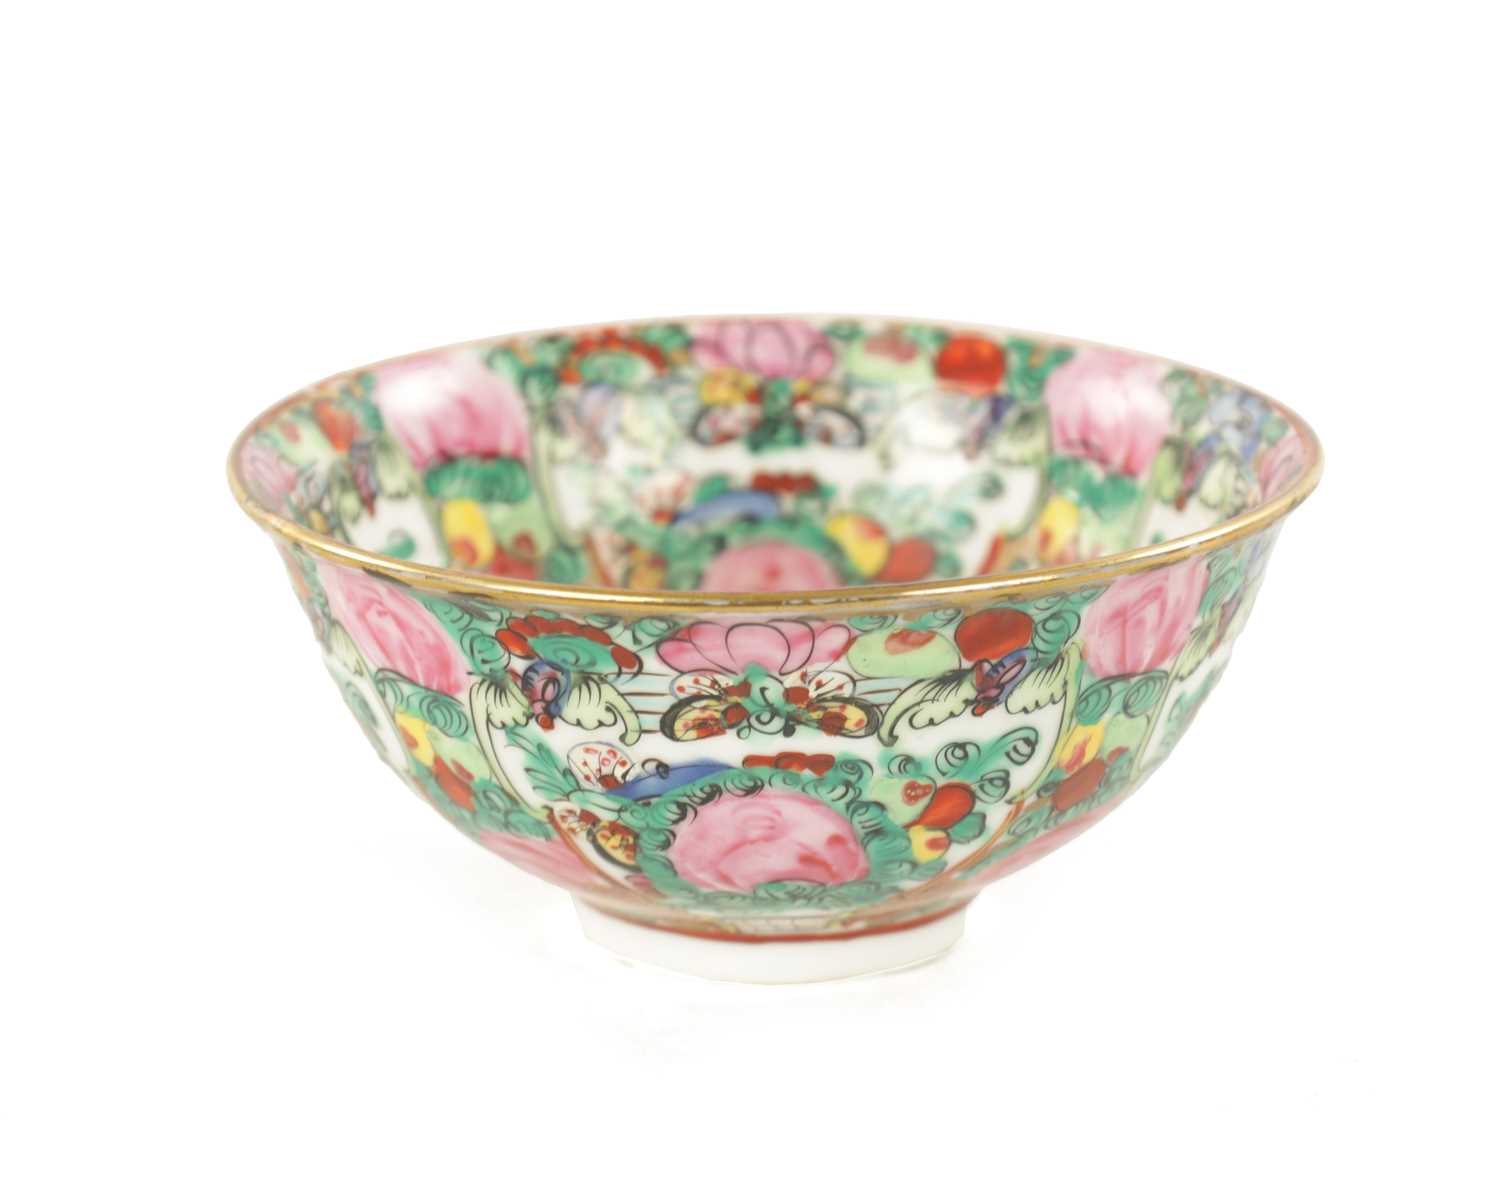 A 20TH CENTURY CHINESE EXPORT FAMILLE ROSE SMALL RICE BOWL